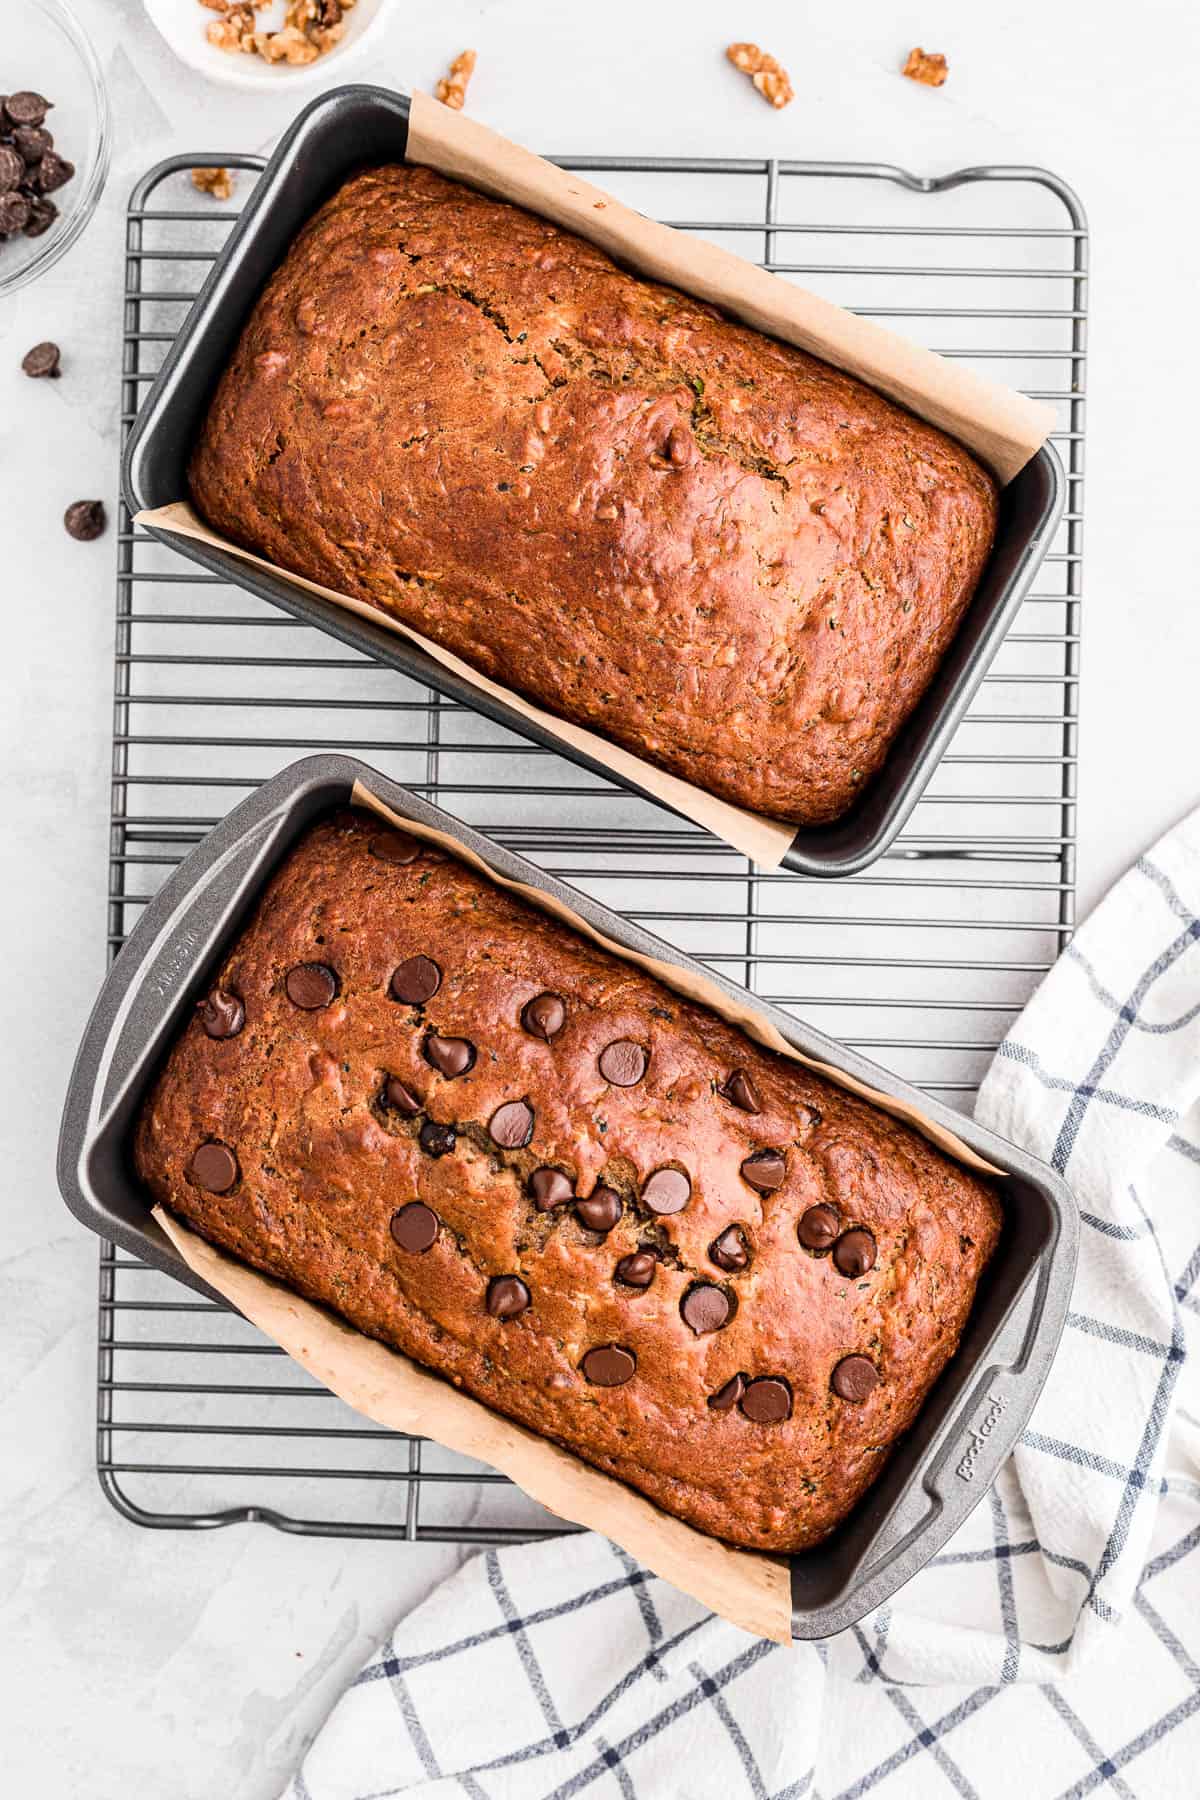 two loaves of banana zucchini bread, one with chocolate chips and one without.